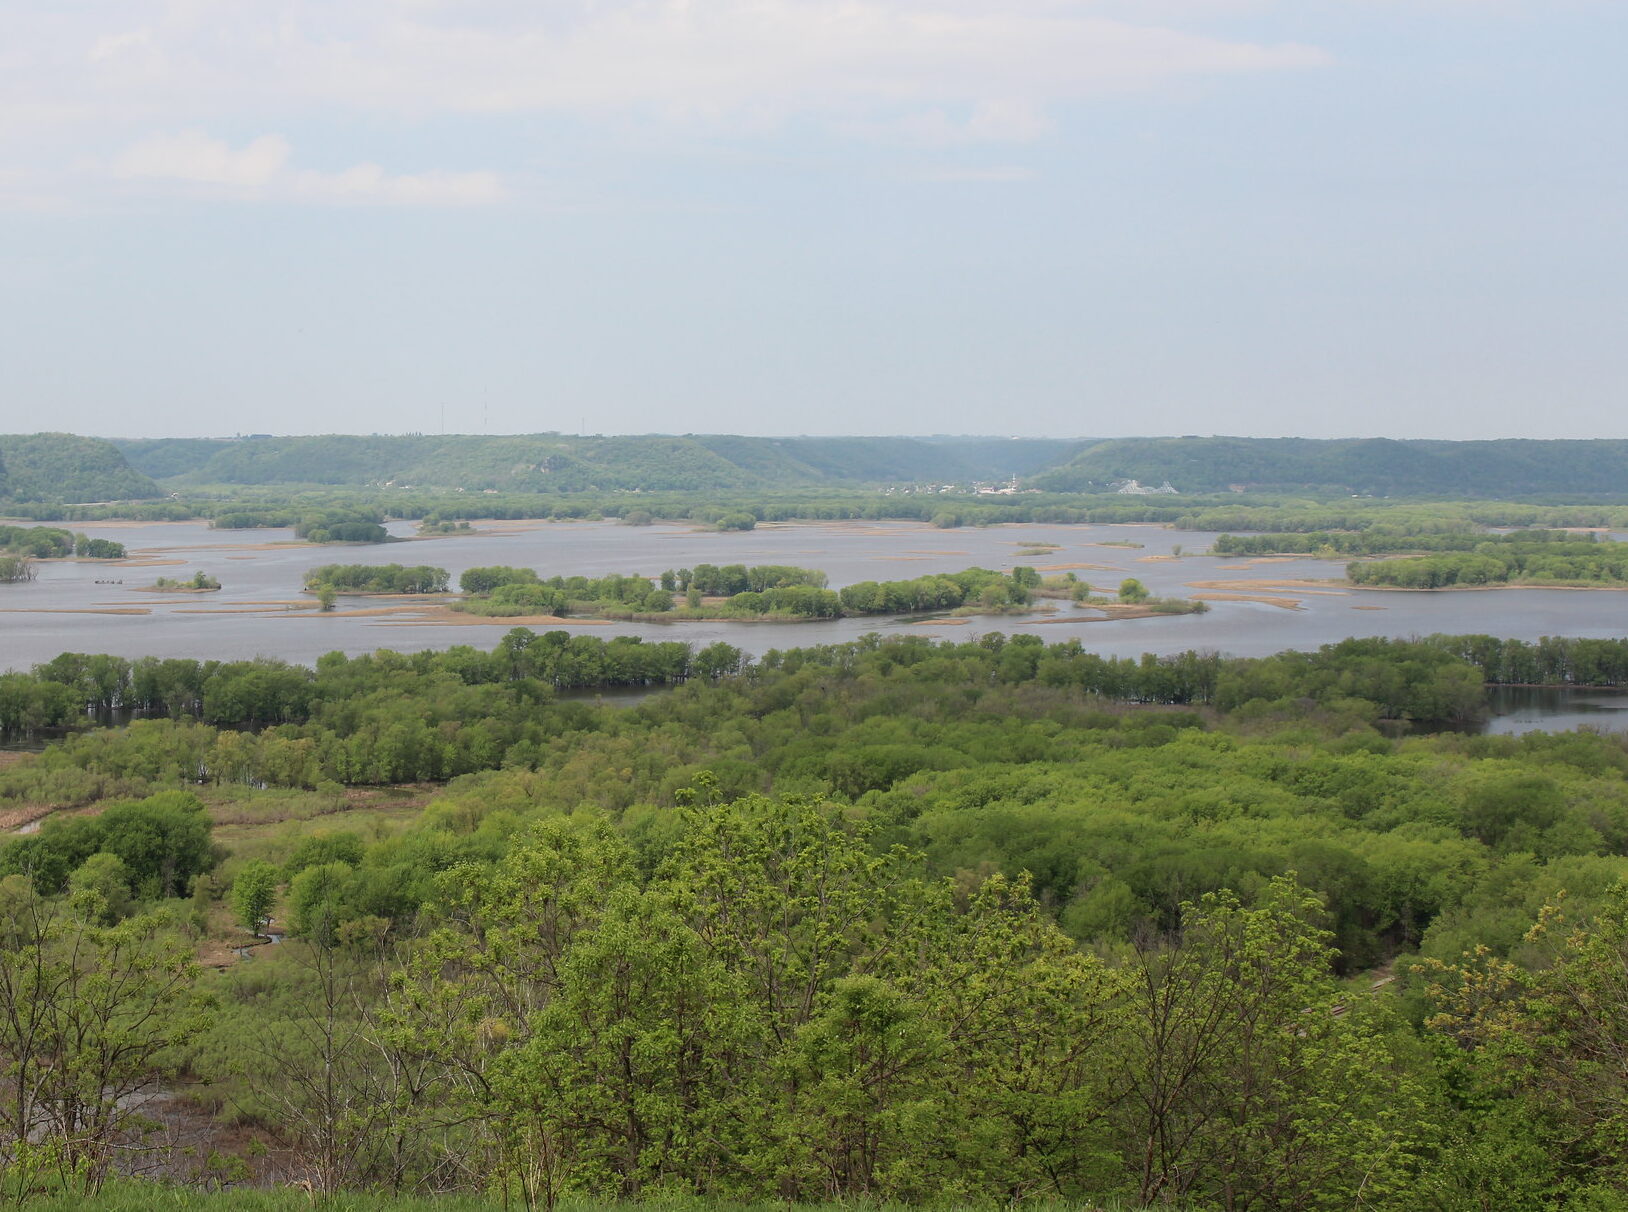 Rush Creek State Natural Area, overlooking the Mississippi River, on a NRF Field Trip. Photo: Caitlin Williamson